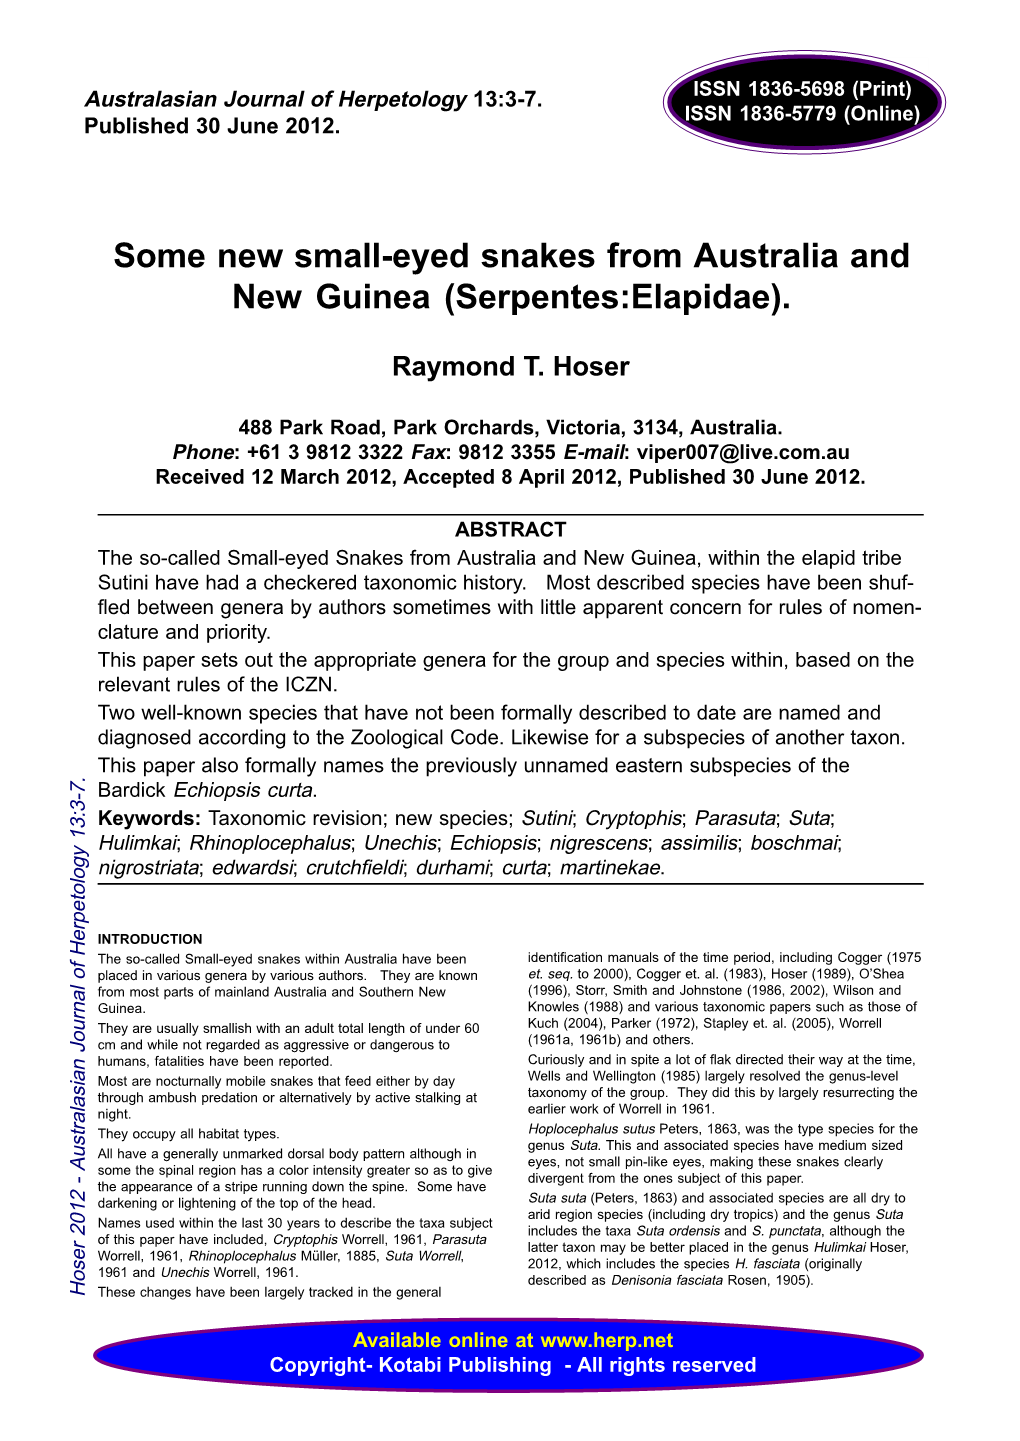 Some New Small-Eyed Snakes from Australia and New Guinea (Serpentes:Elapidae)